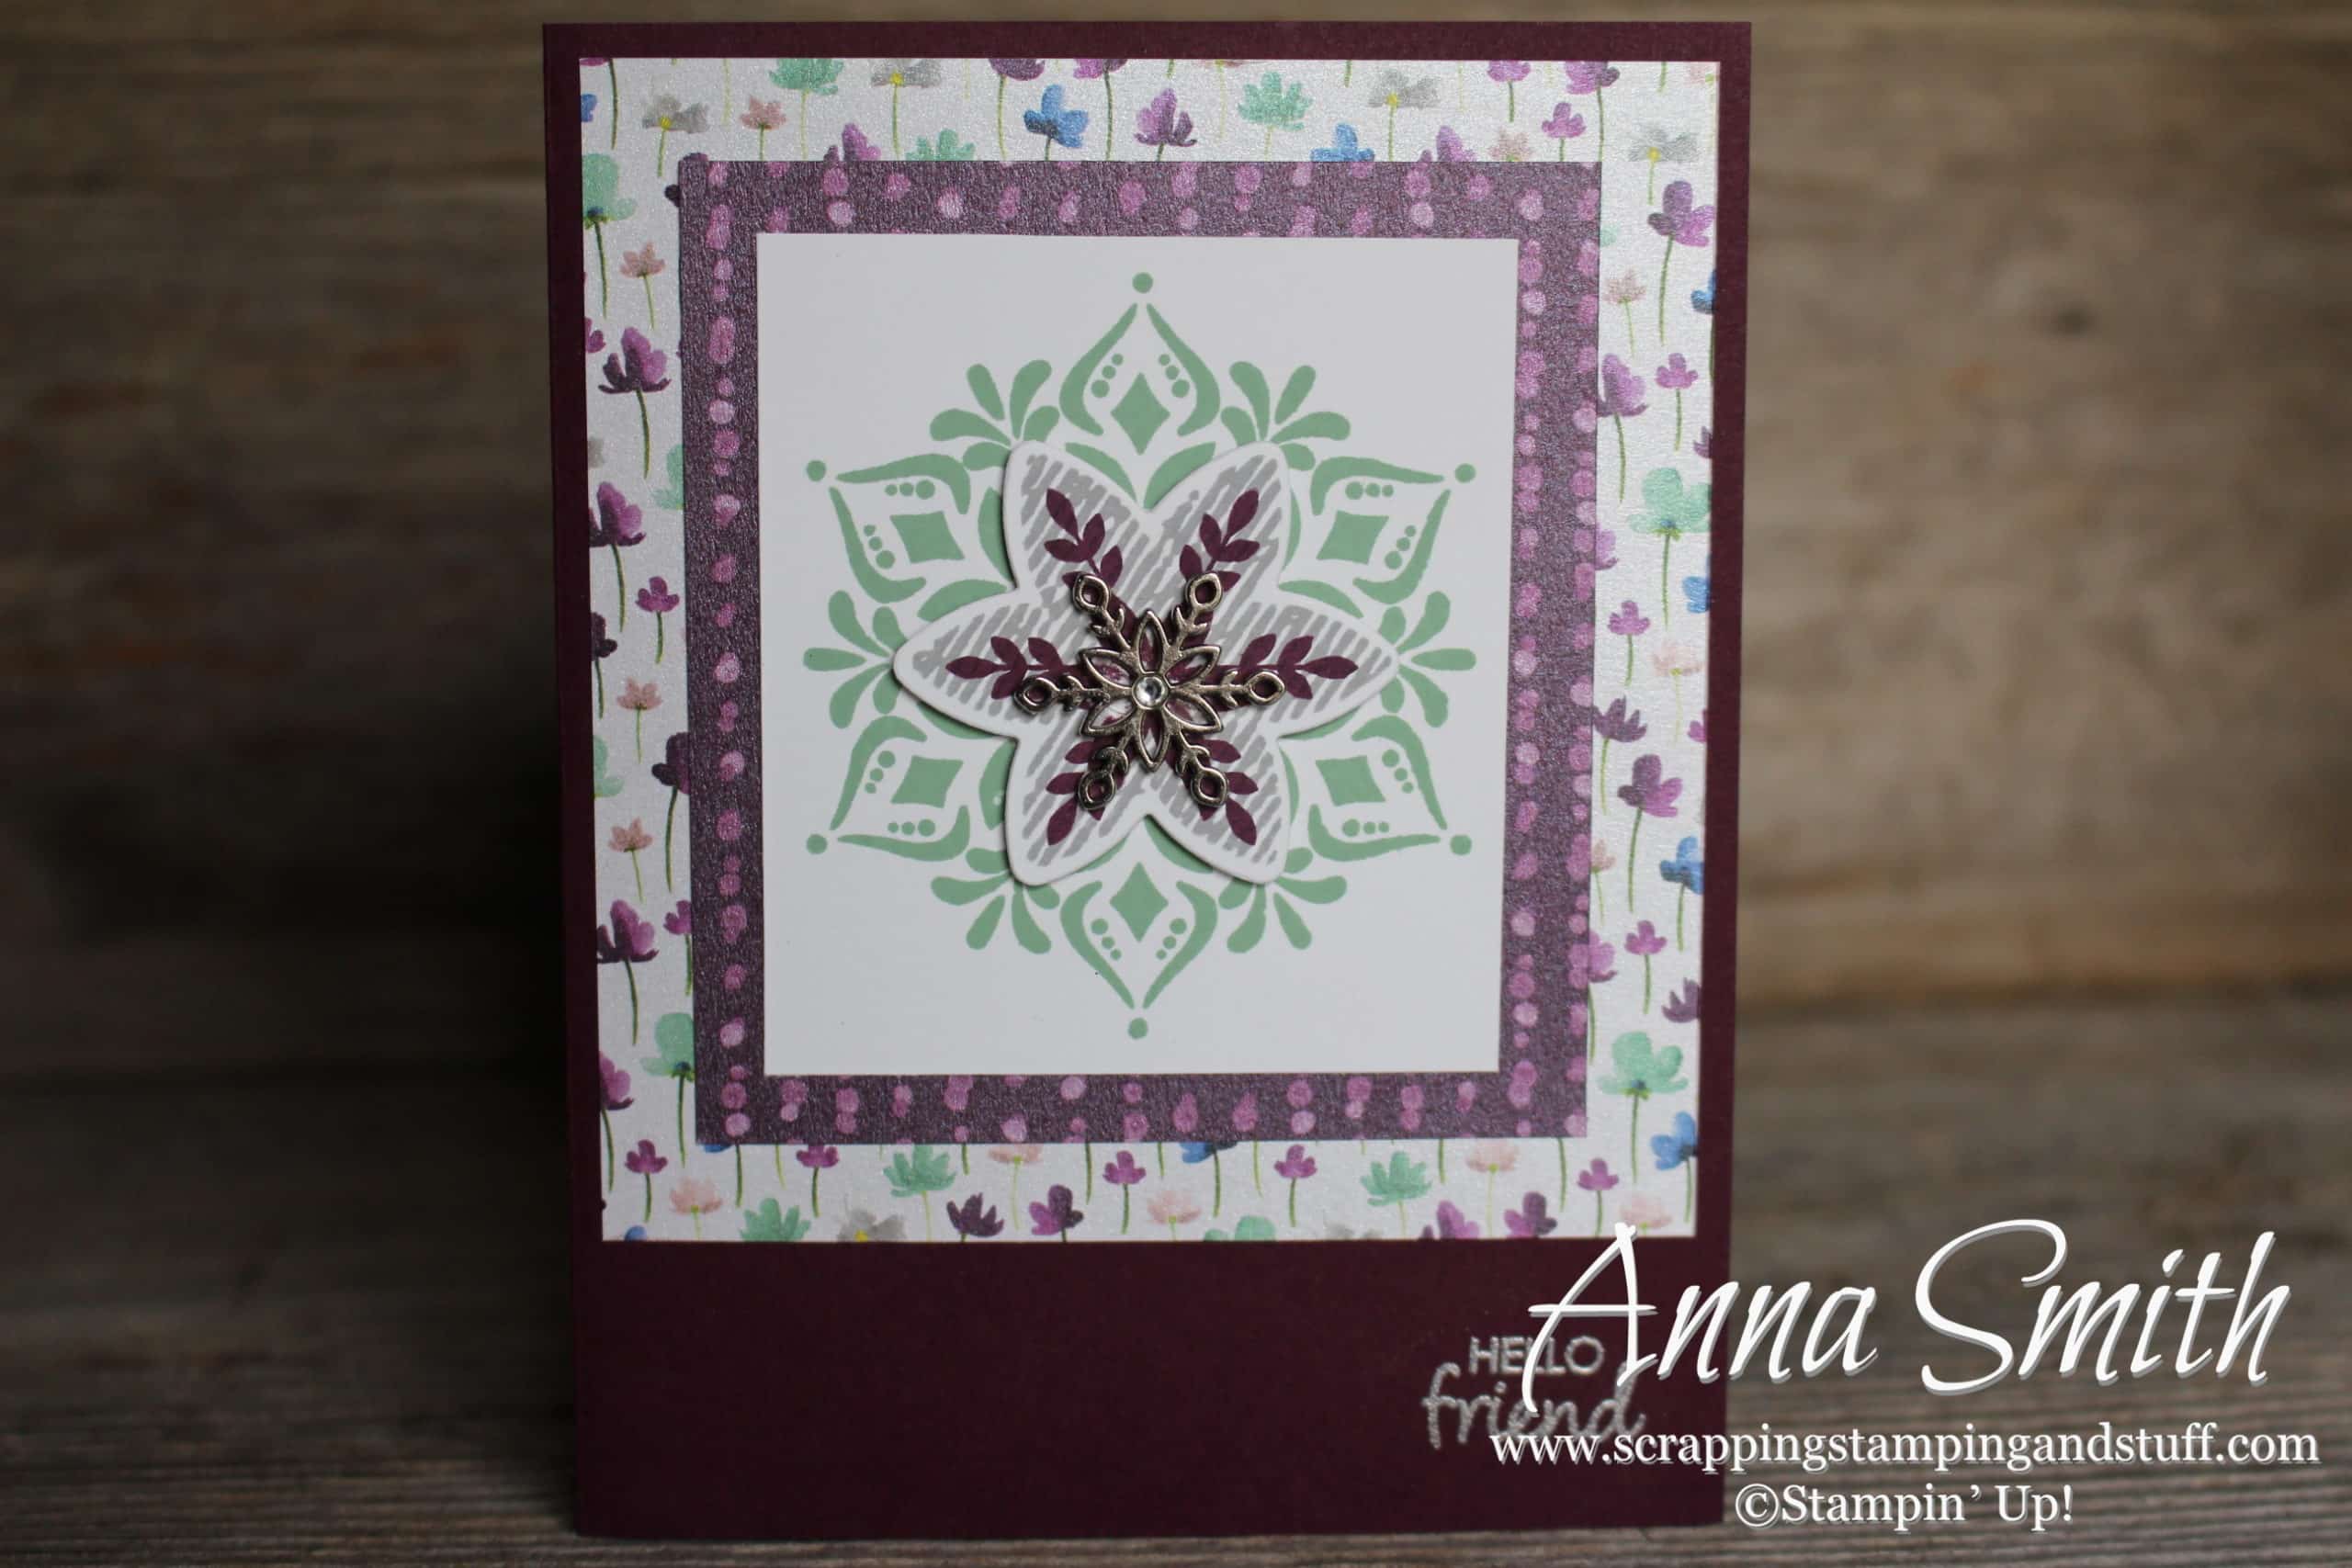 Snowflake Showcase – Sending Positive Thoughts Card